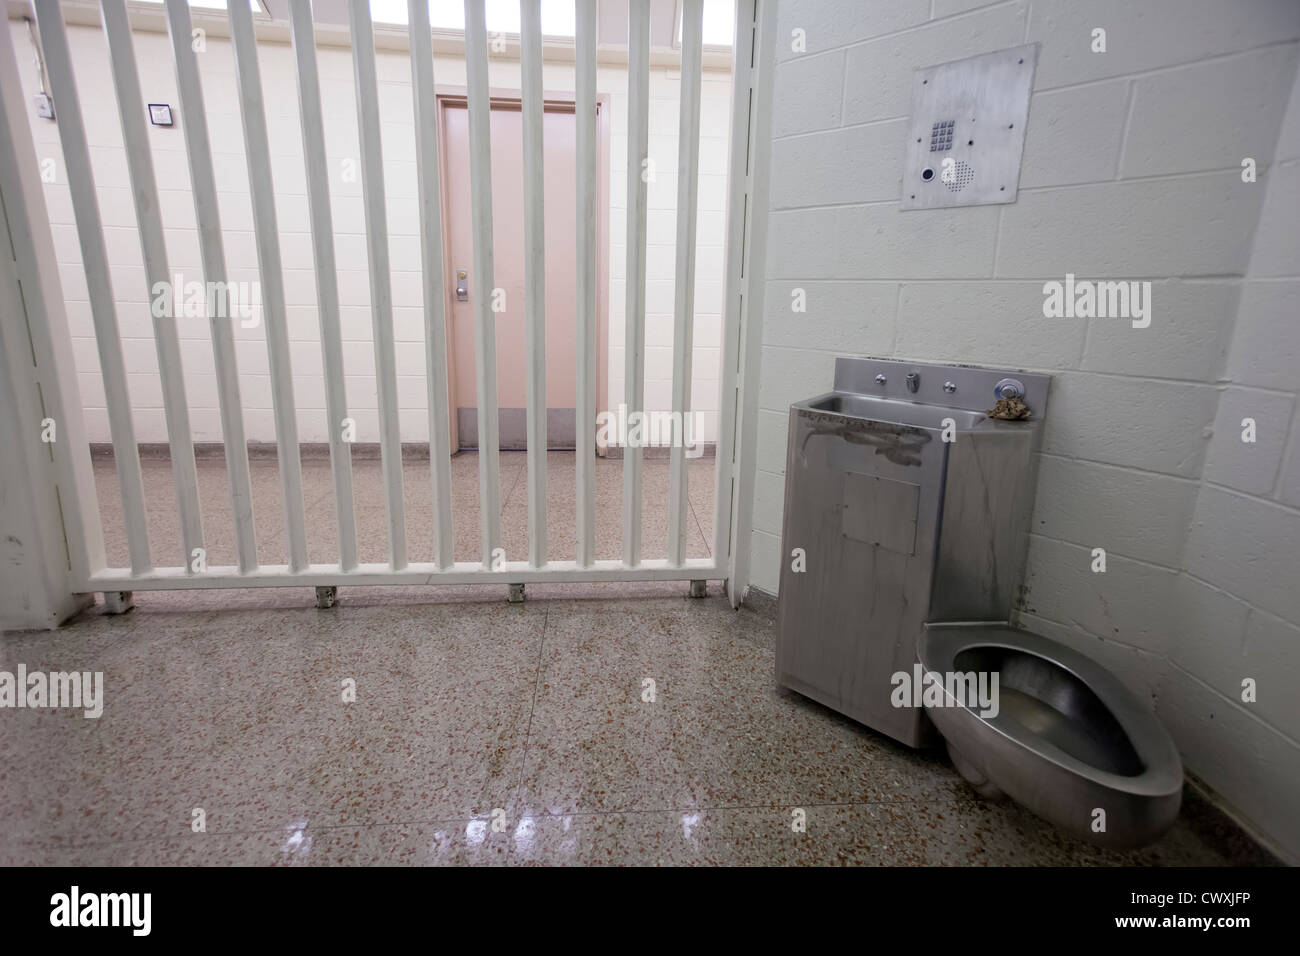 Detroit, Michigan - A jail cell in a police station. Stock Photo